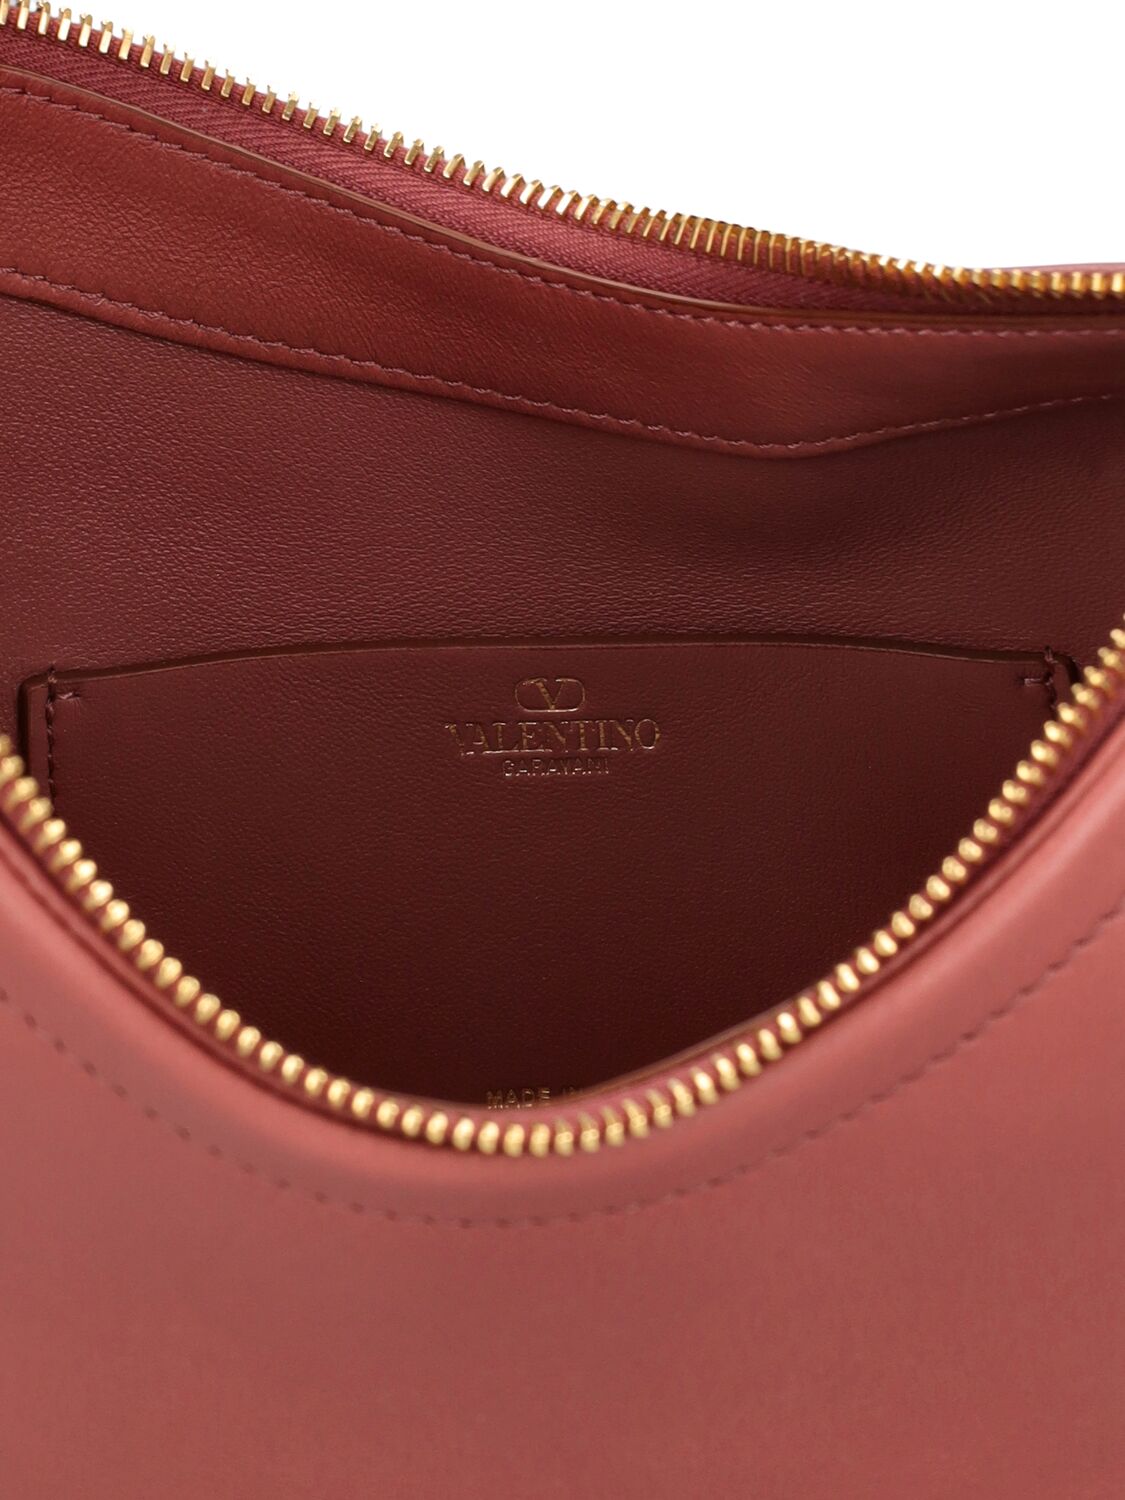 Shop Valentino Mini Vlogo Moon Leather Top Handle Bag In Rose Brown